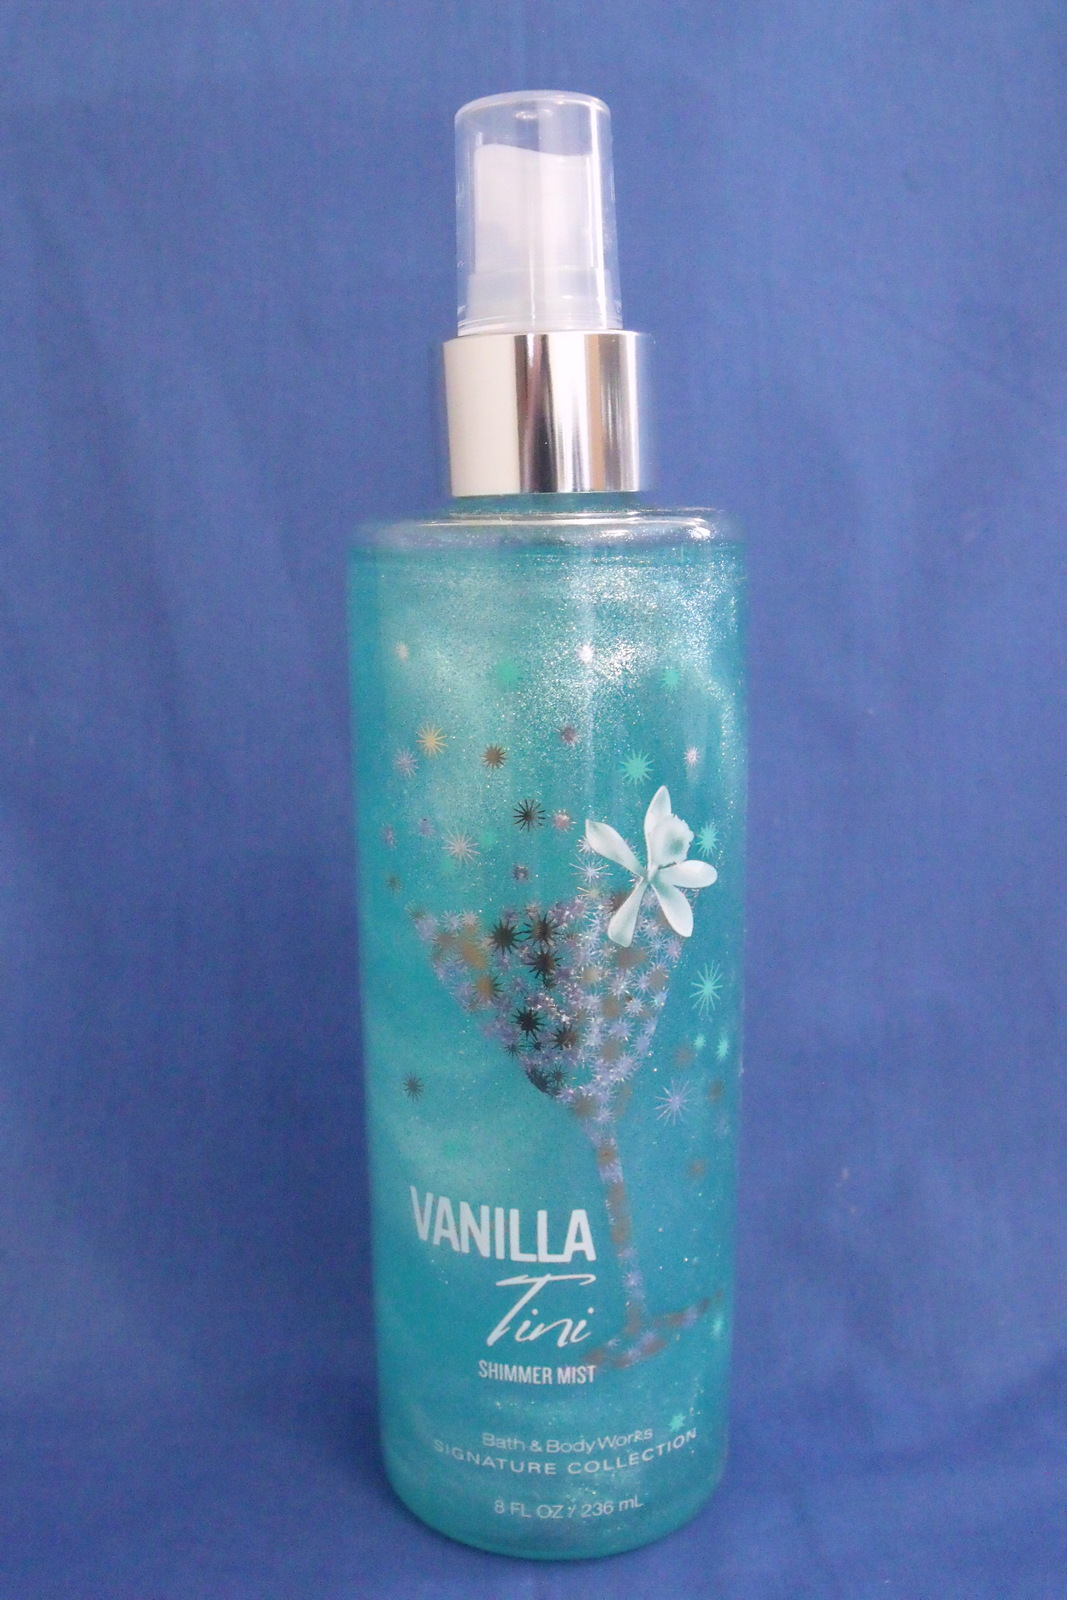 Primary image for Bath and Body Works New Vanillatini Shimmer Mist 8 oz